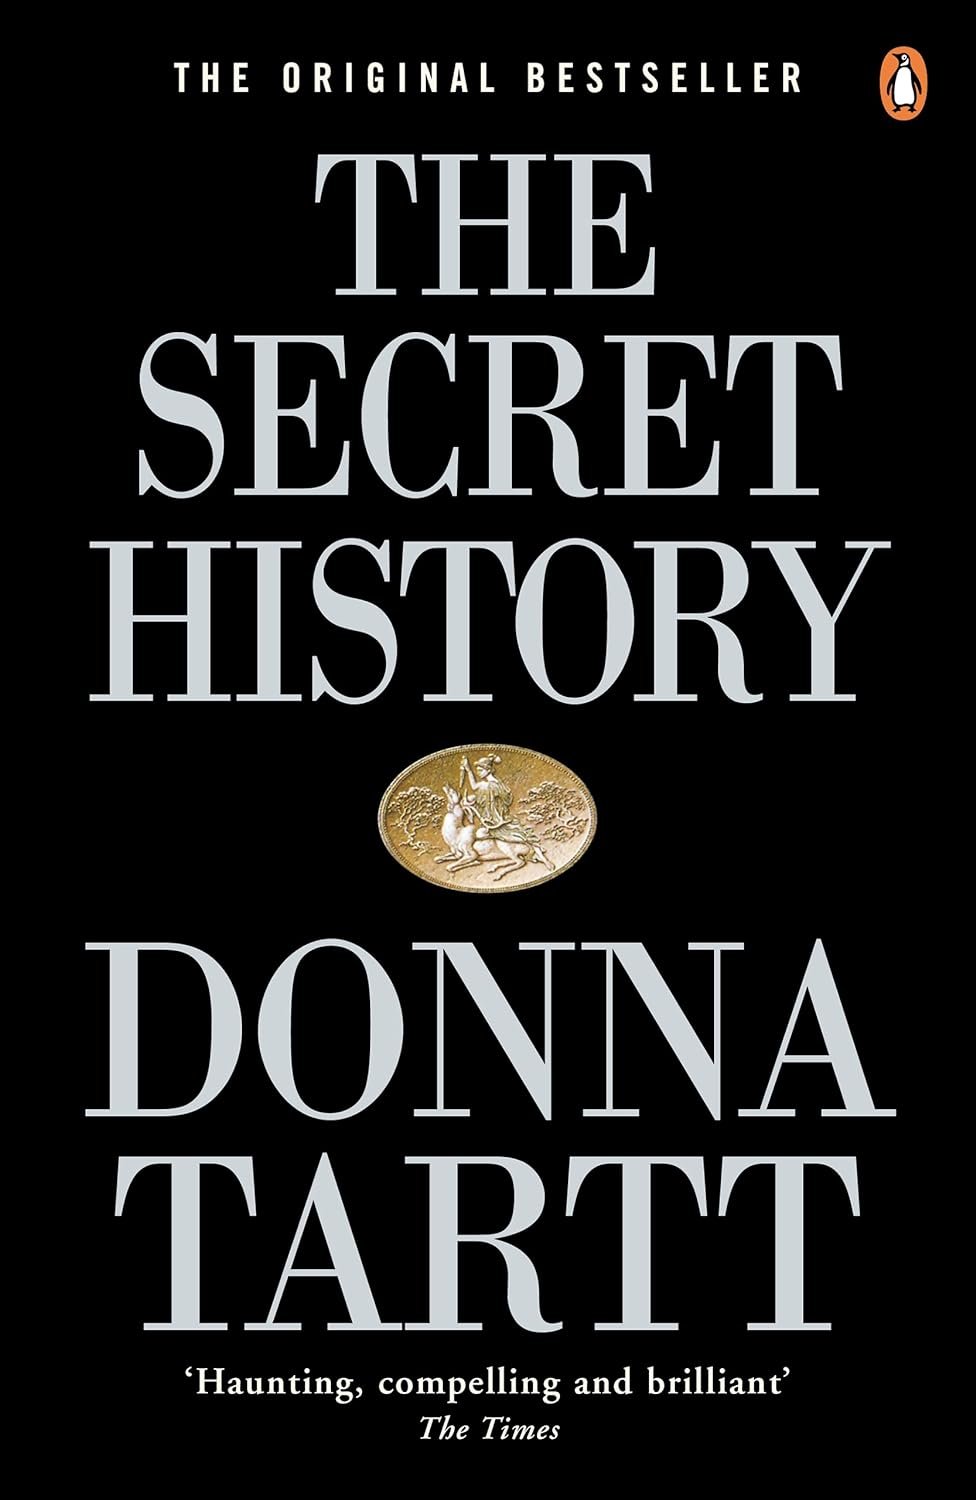 The Secret History - English Book Club Course -  Thursdays from 11th January